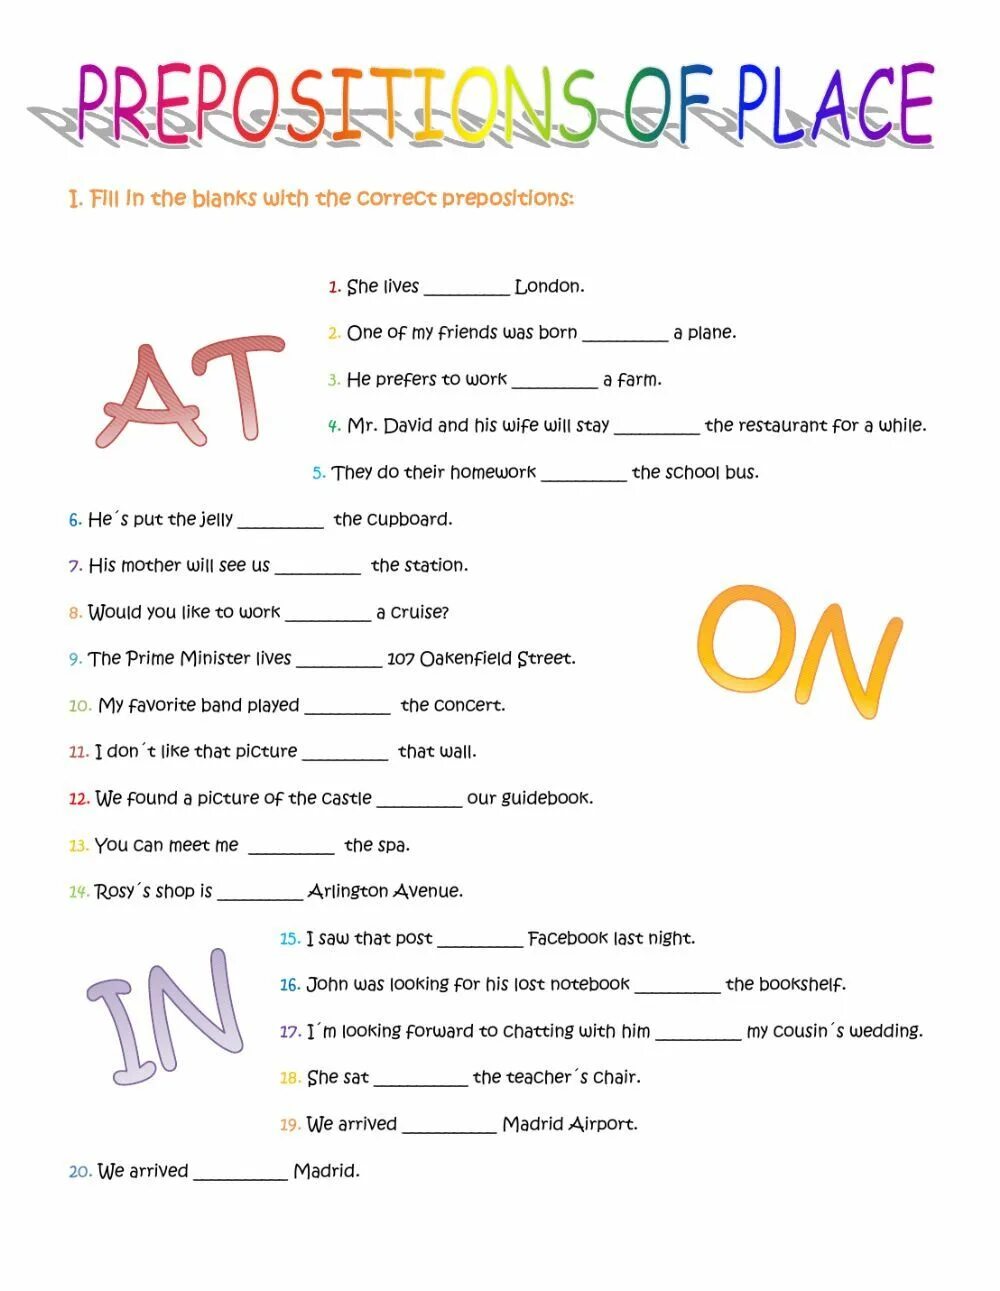 Предлоги at in on Worksheets. In at on место Worksheets. In on at exercises. Prepositions of place in on at.